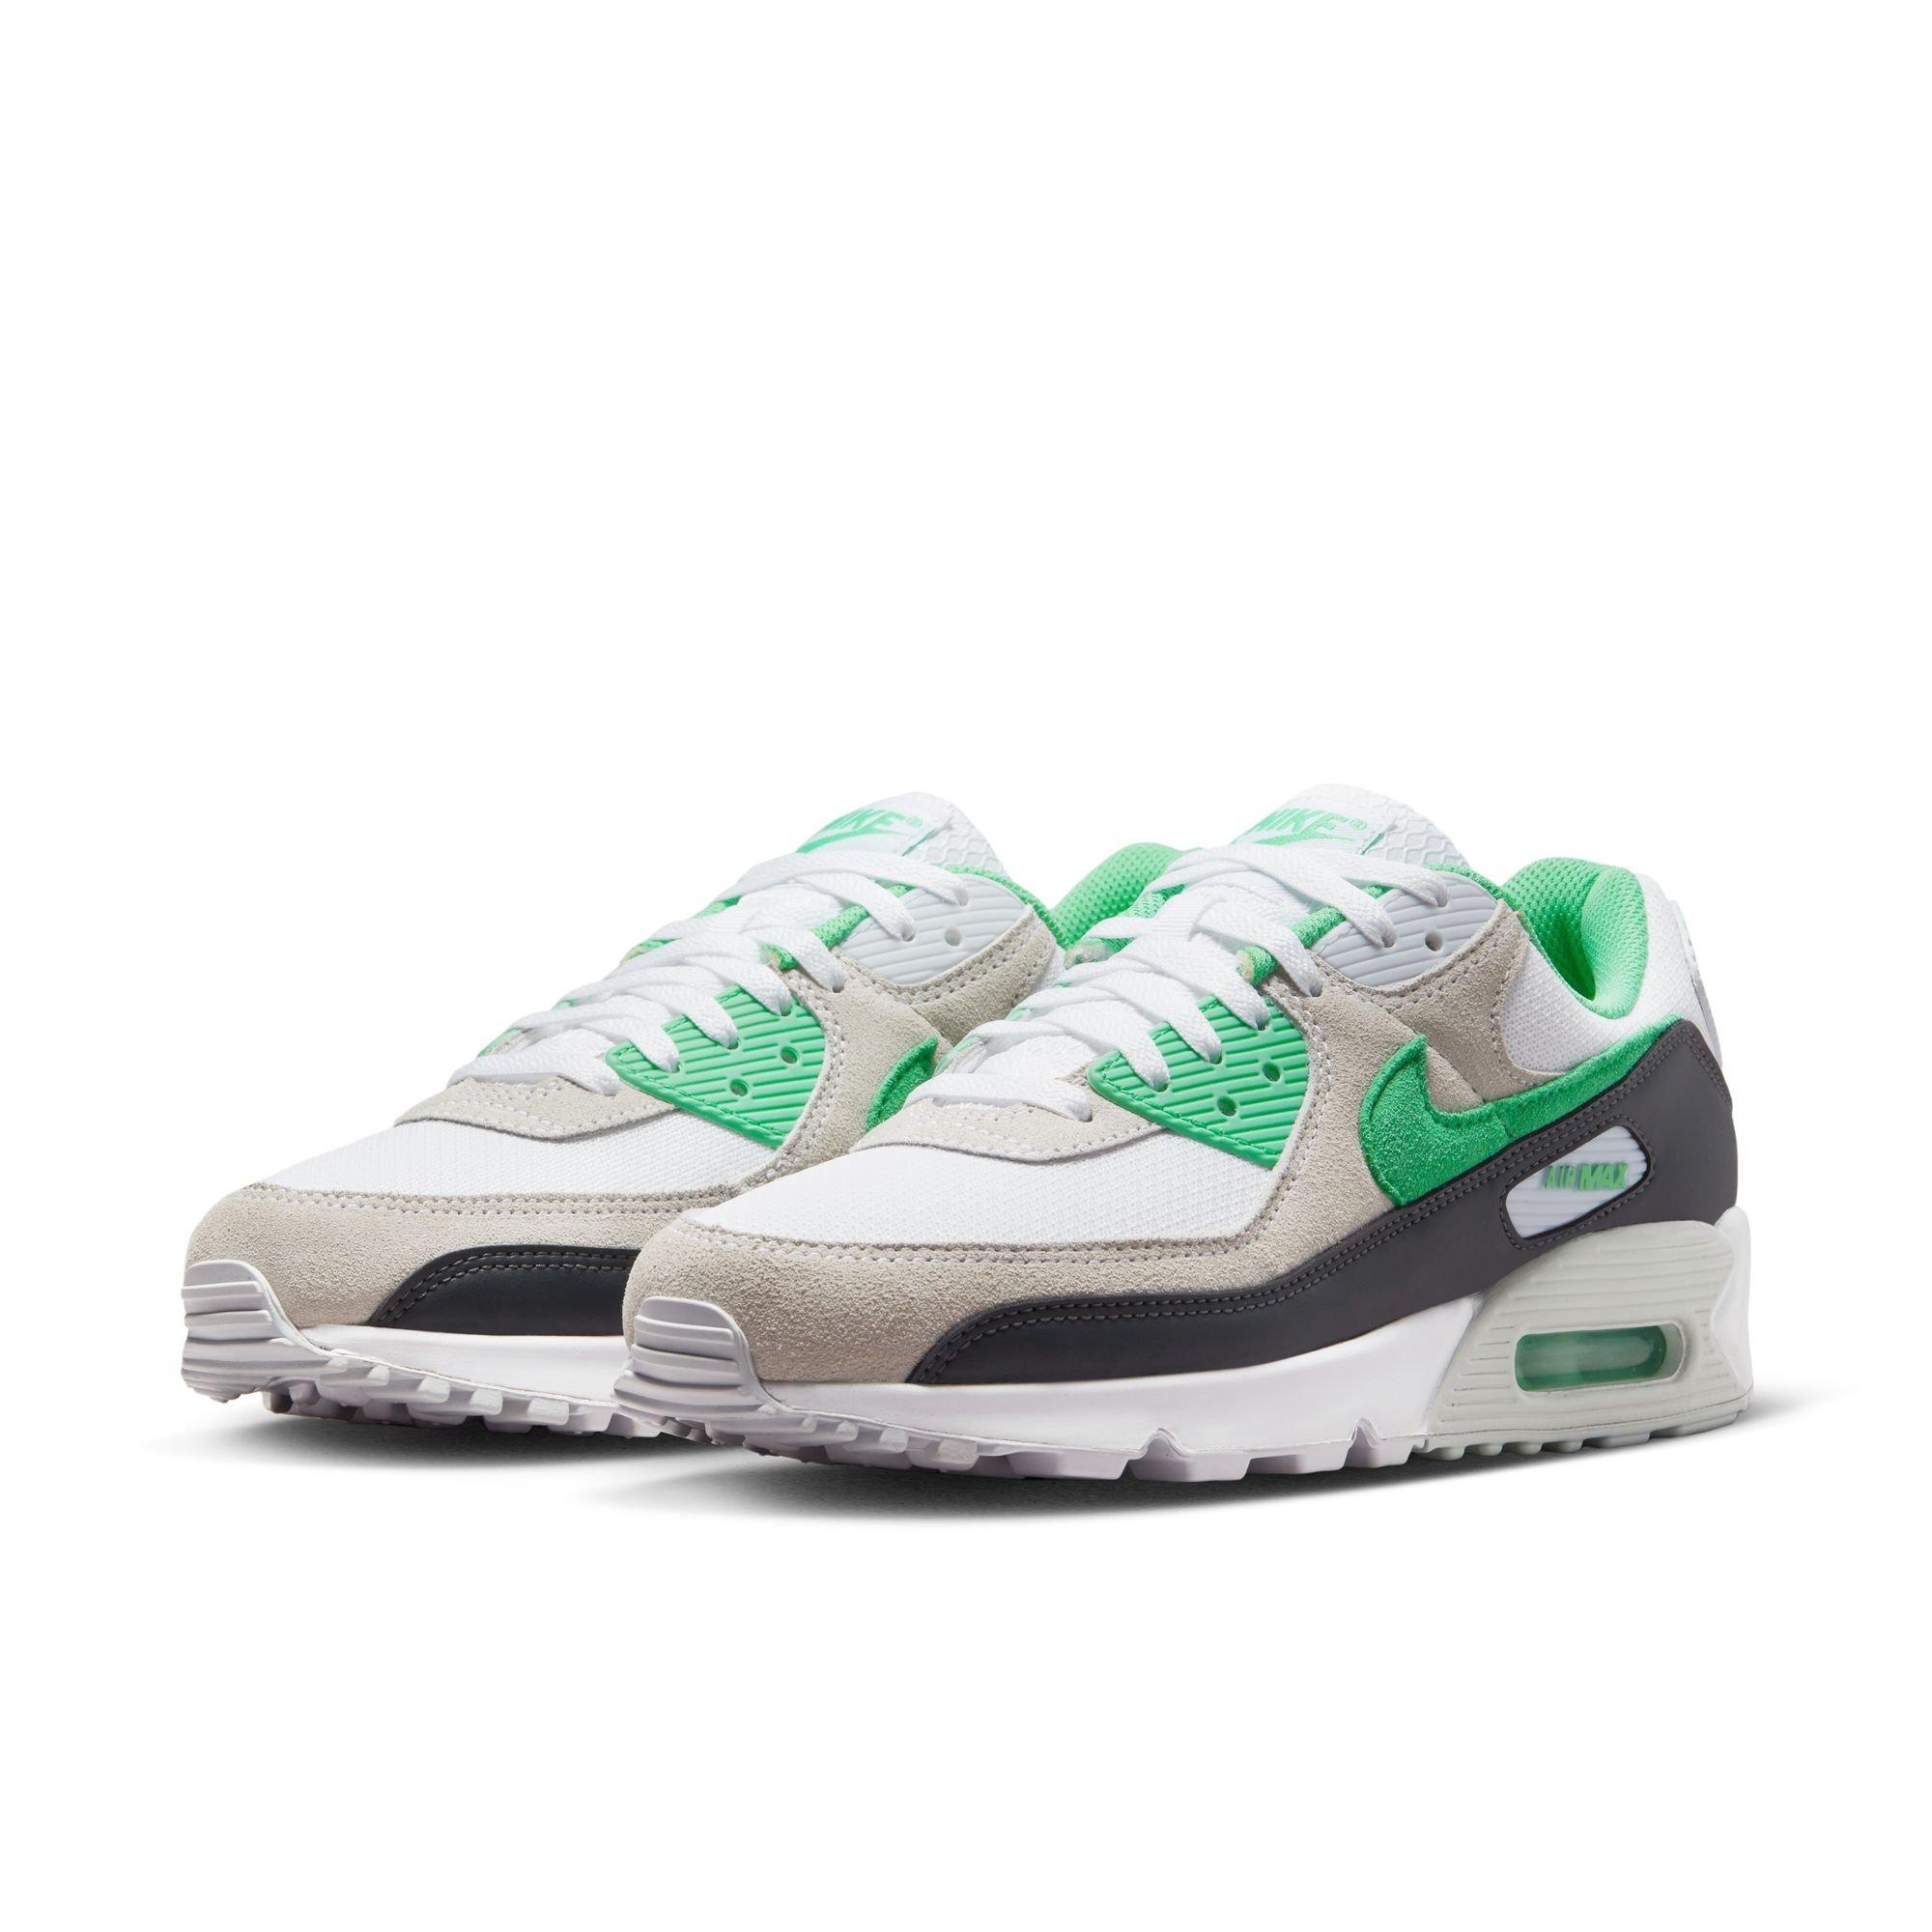 Air Max 90 "White/Spring Green/Anthracite" Men's Shoe